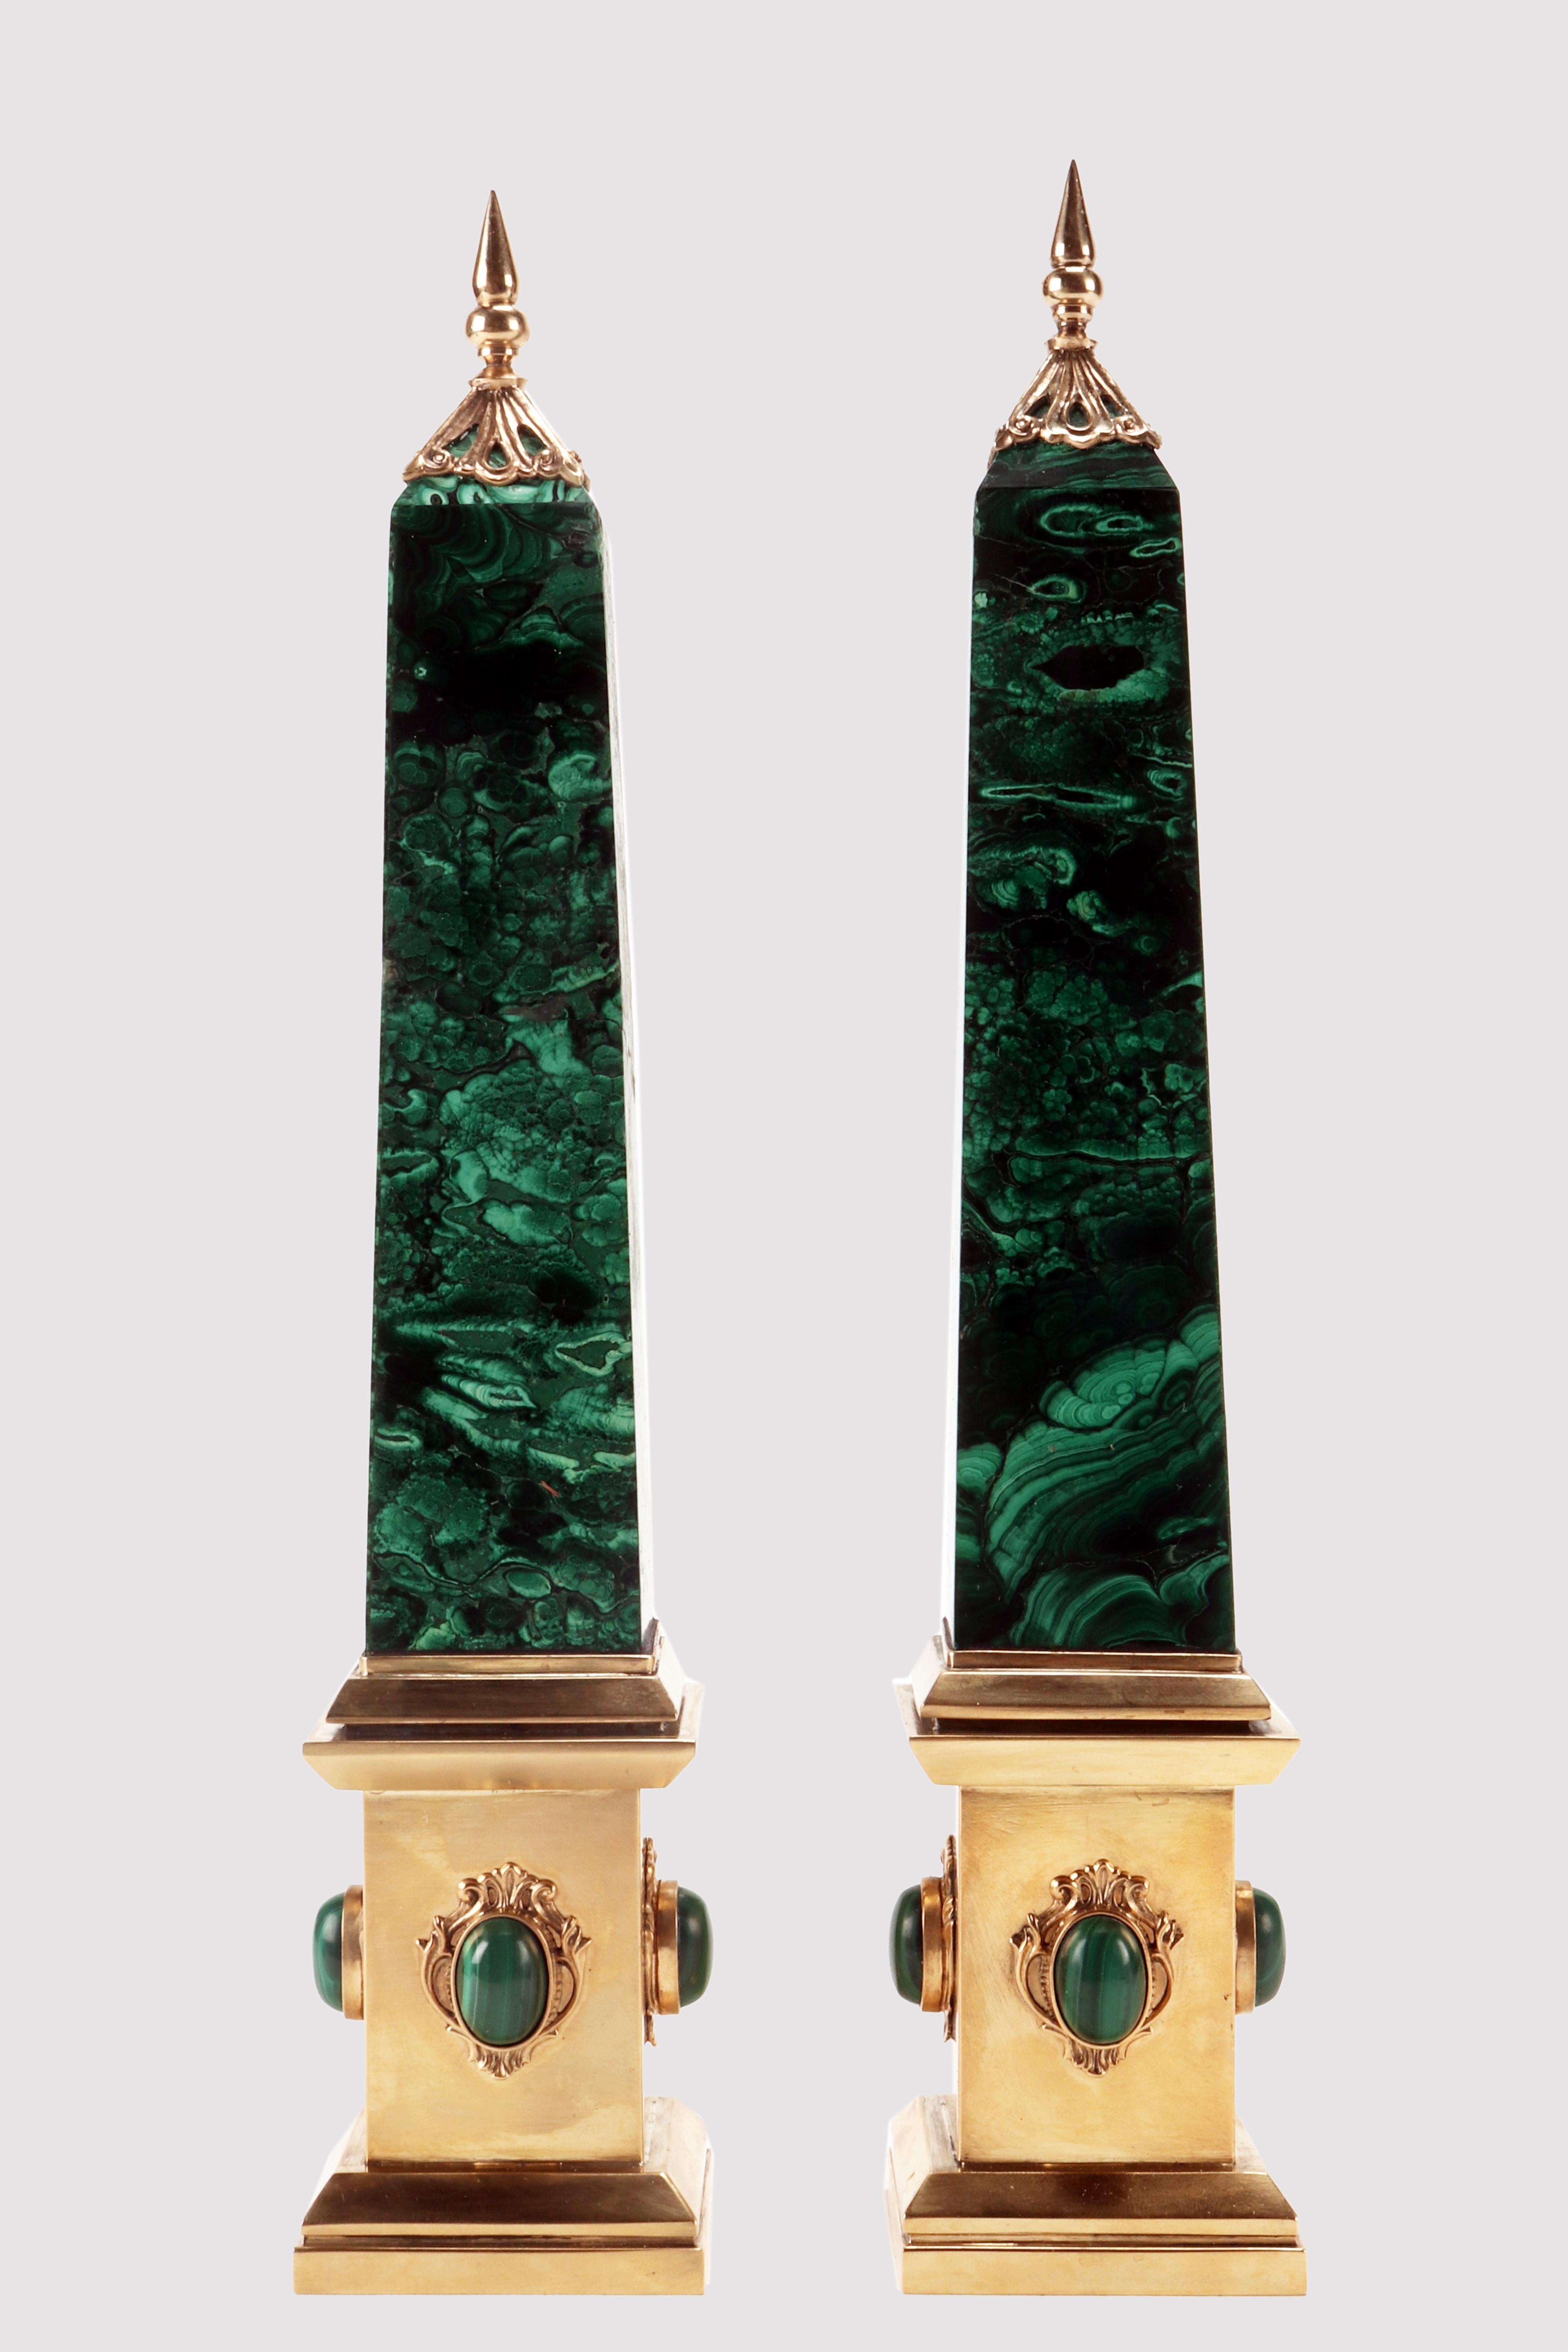 A pair of Grand Tour obelisks. Made of Malachite. The base, the feet and the tips of the obelisks are made of gilded bronze. At the center of the sides of the plinth, there is a bezel with an oval cabochon malachite. Italy second half of the 19th